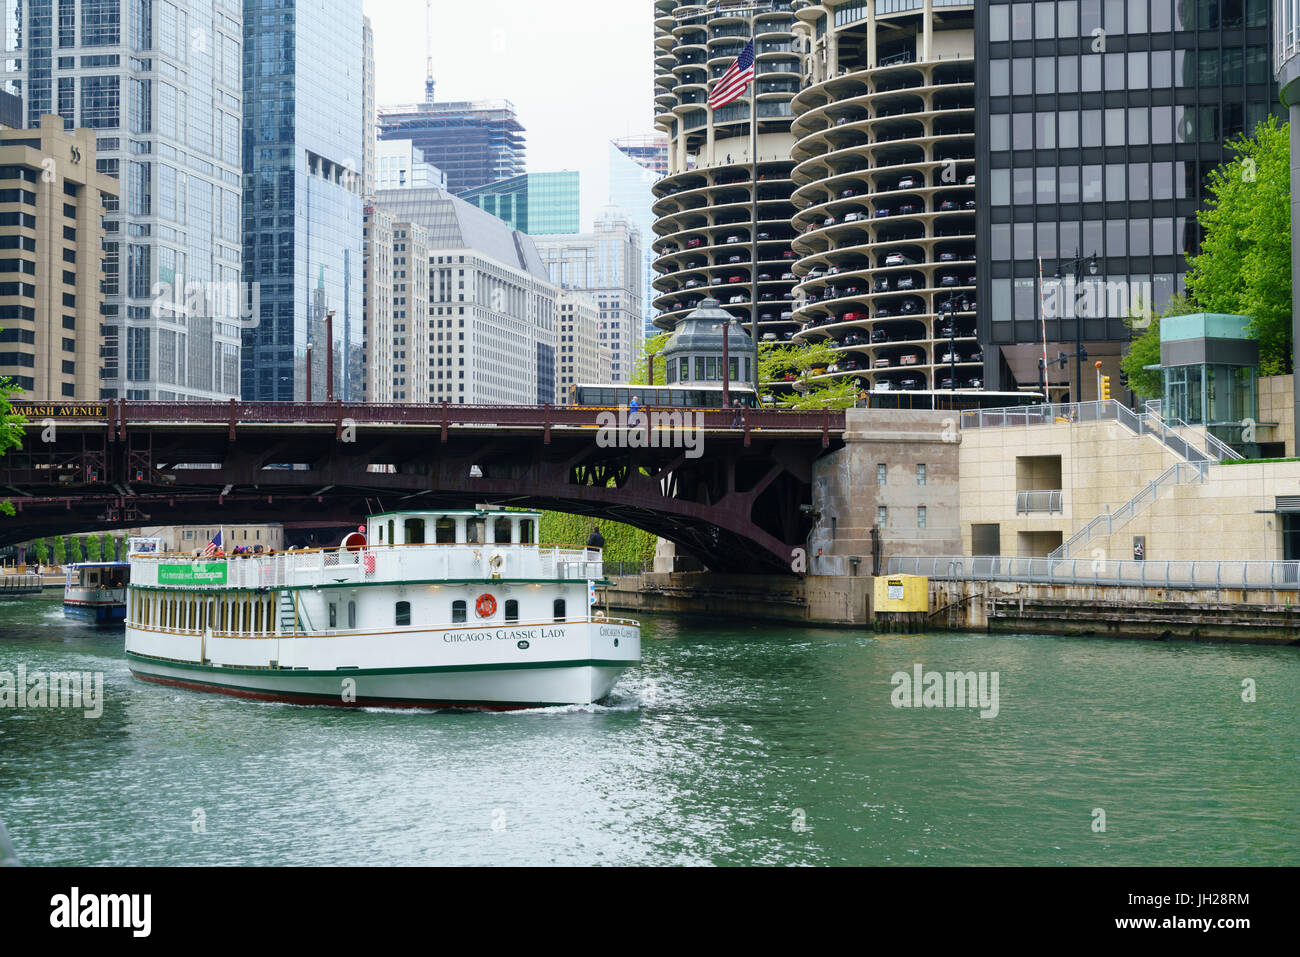 Sightseeing boat on the Chicago River, Chicago, Illinois, United States of America, North America Stock Photo